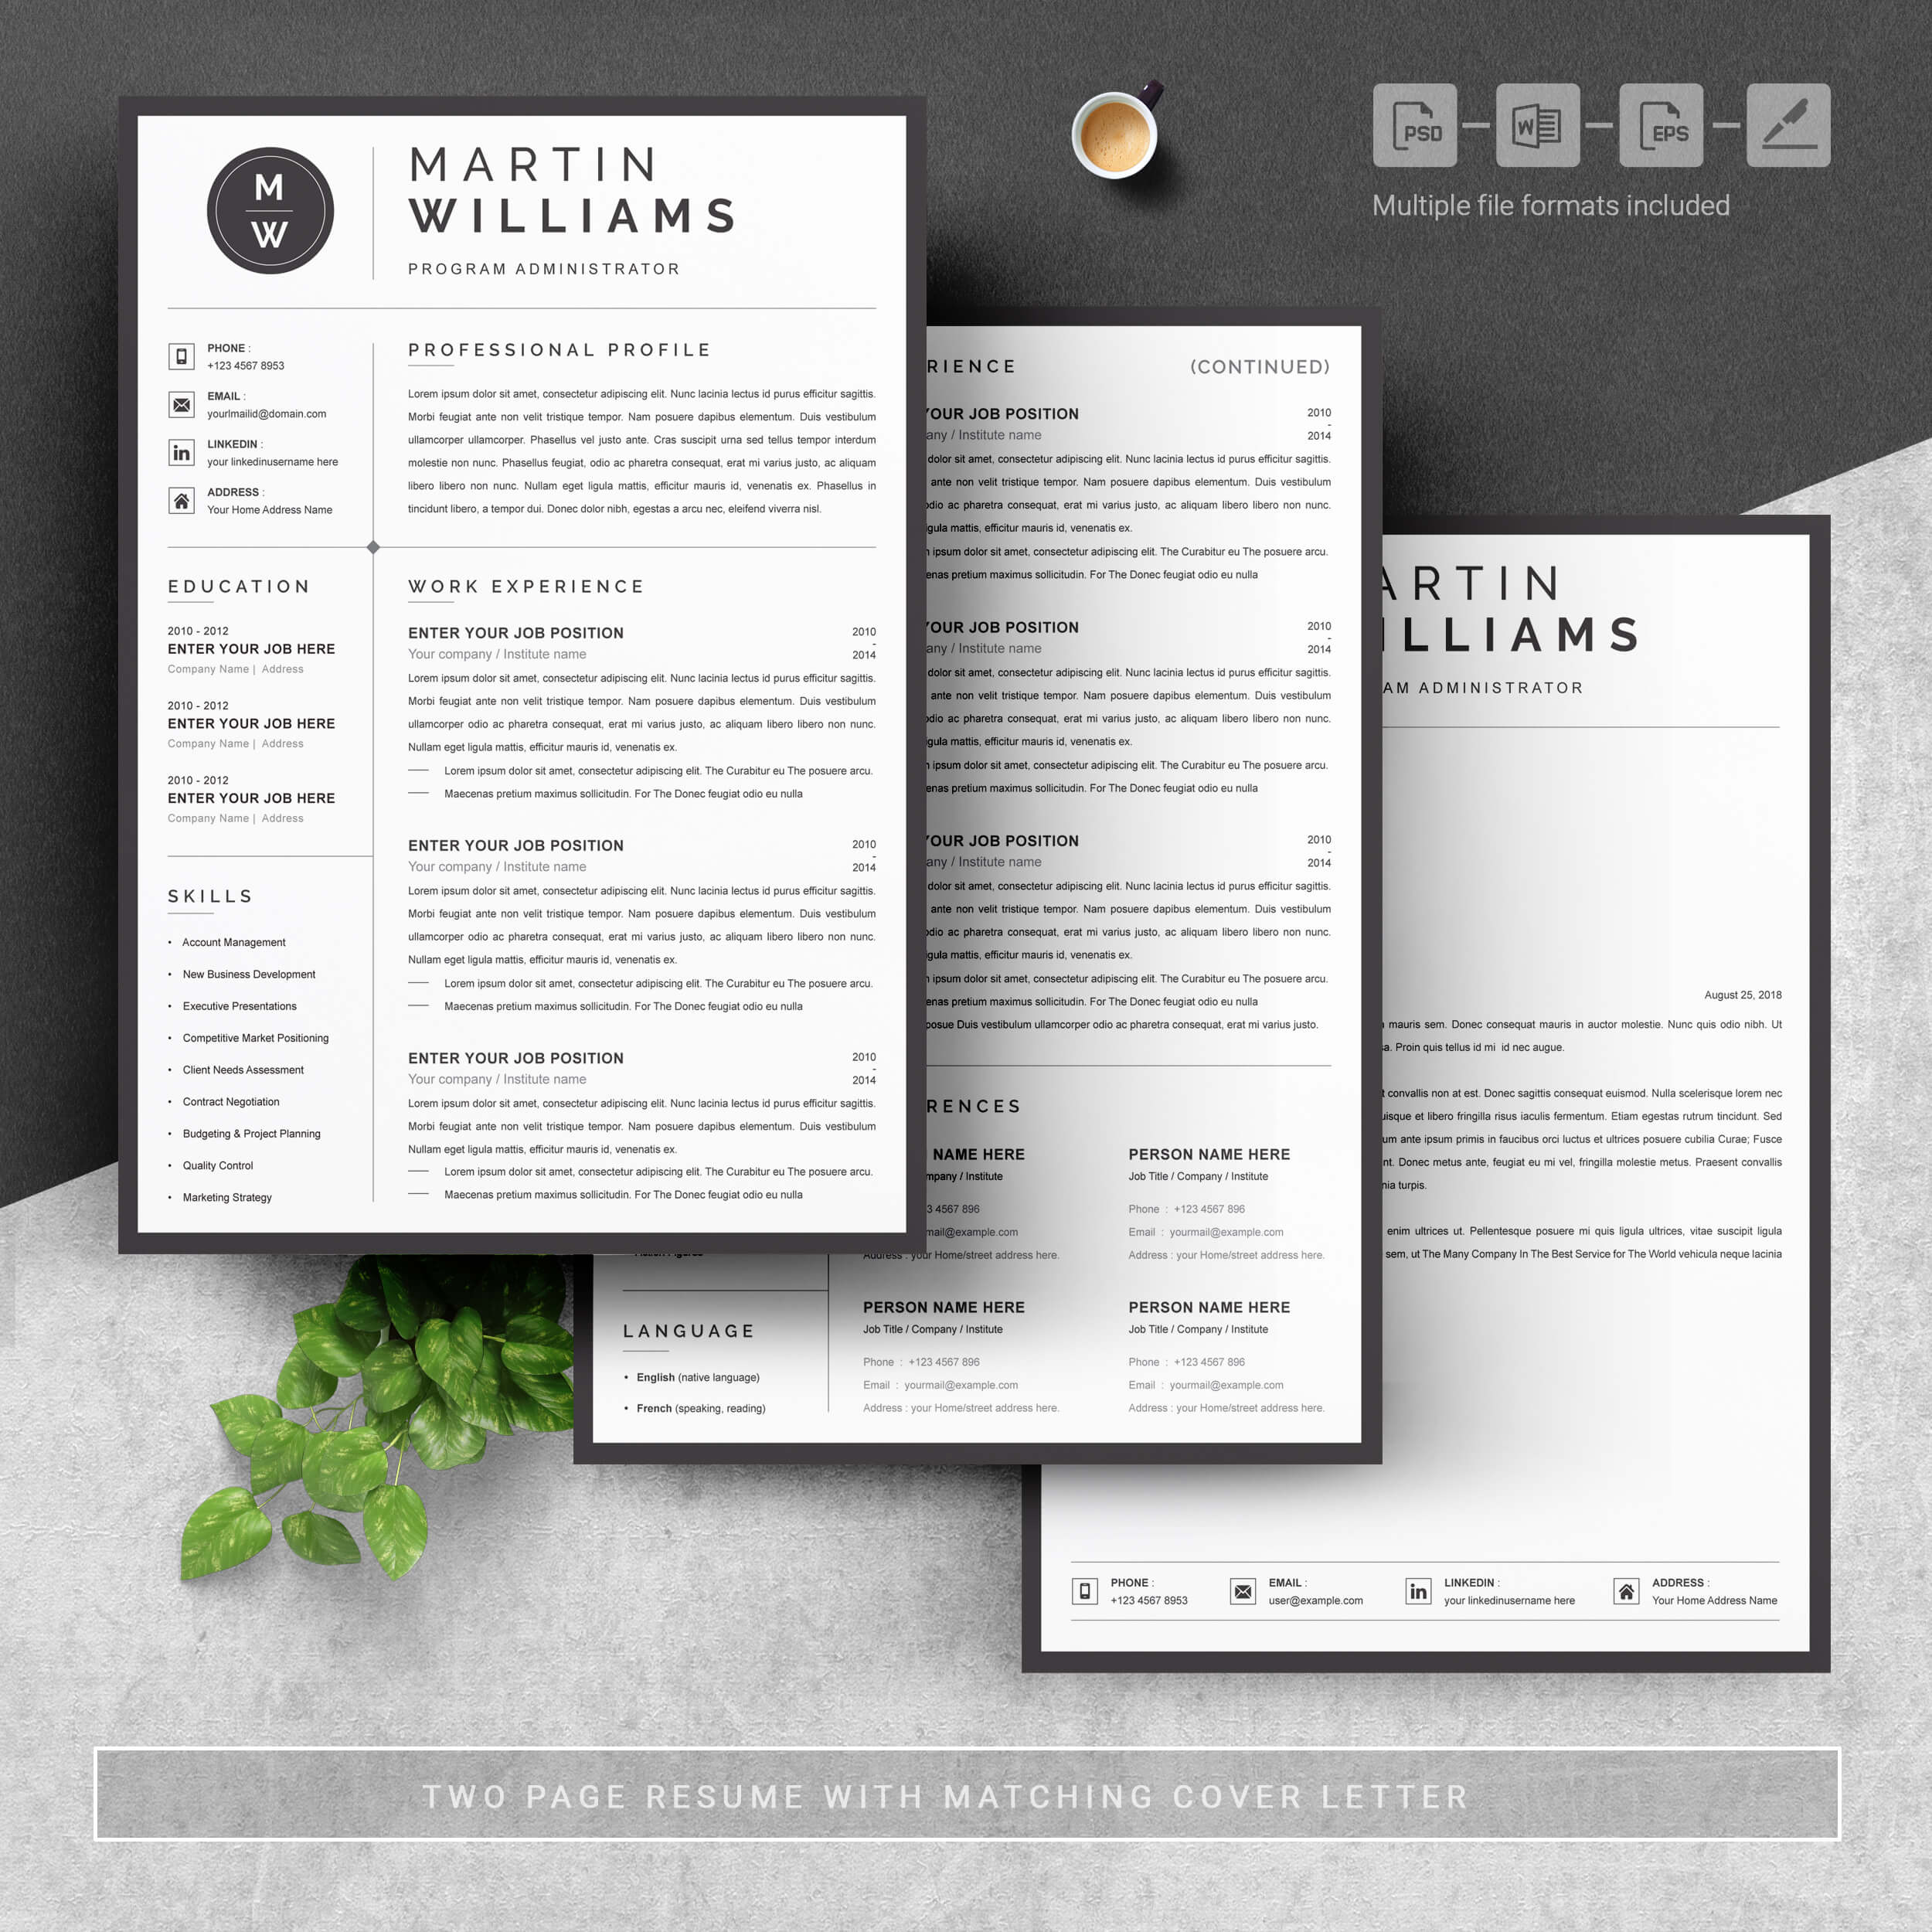 04 3 pages free resume design template 2 185